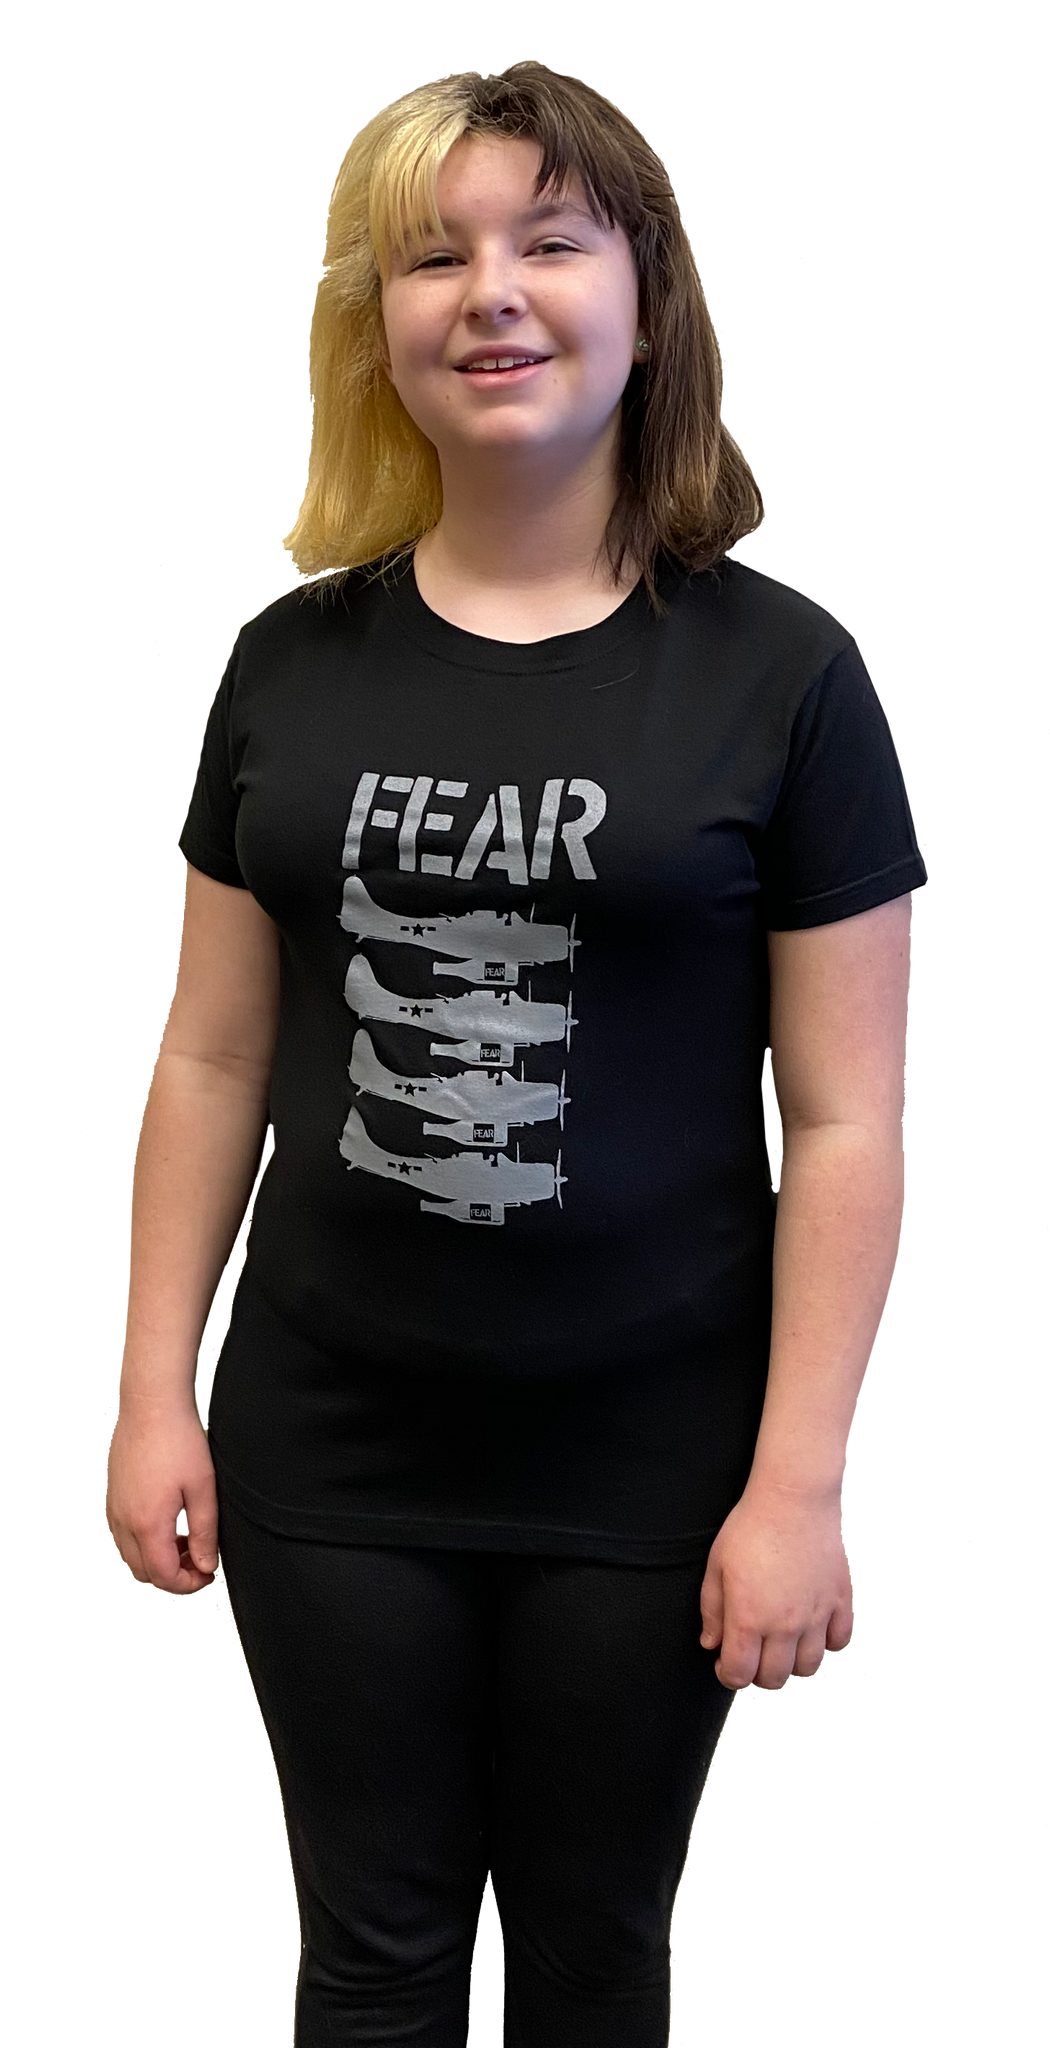 FEAR - WOMENS "BEER BOMBERS" T-SHIRT